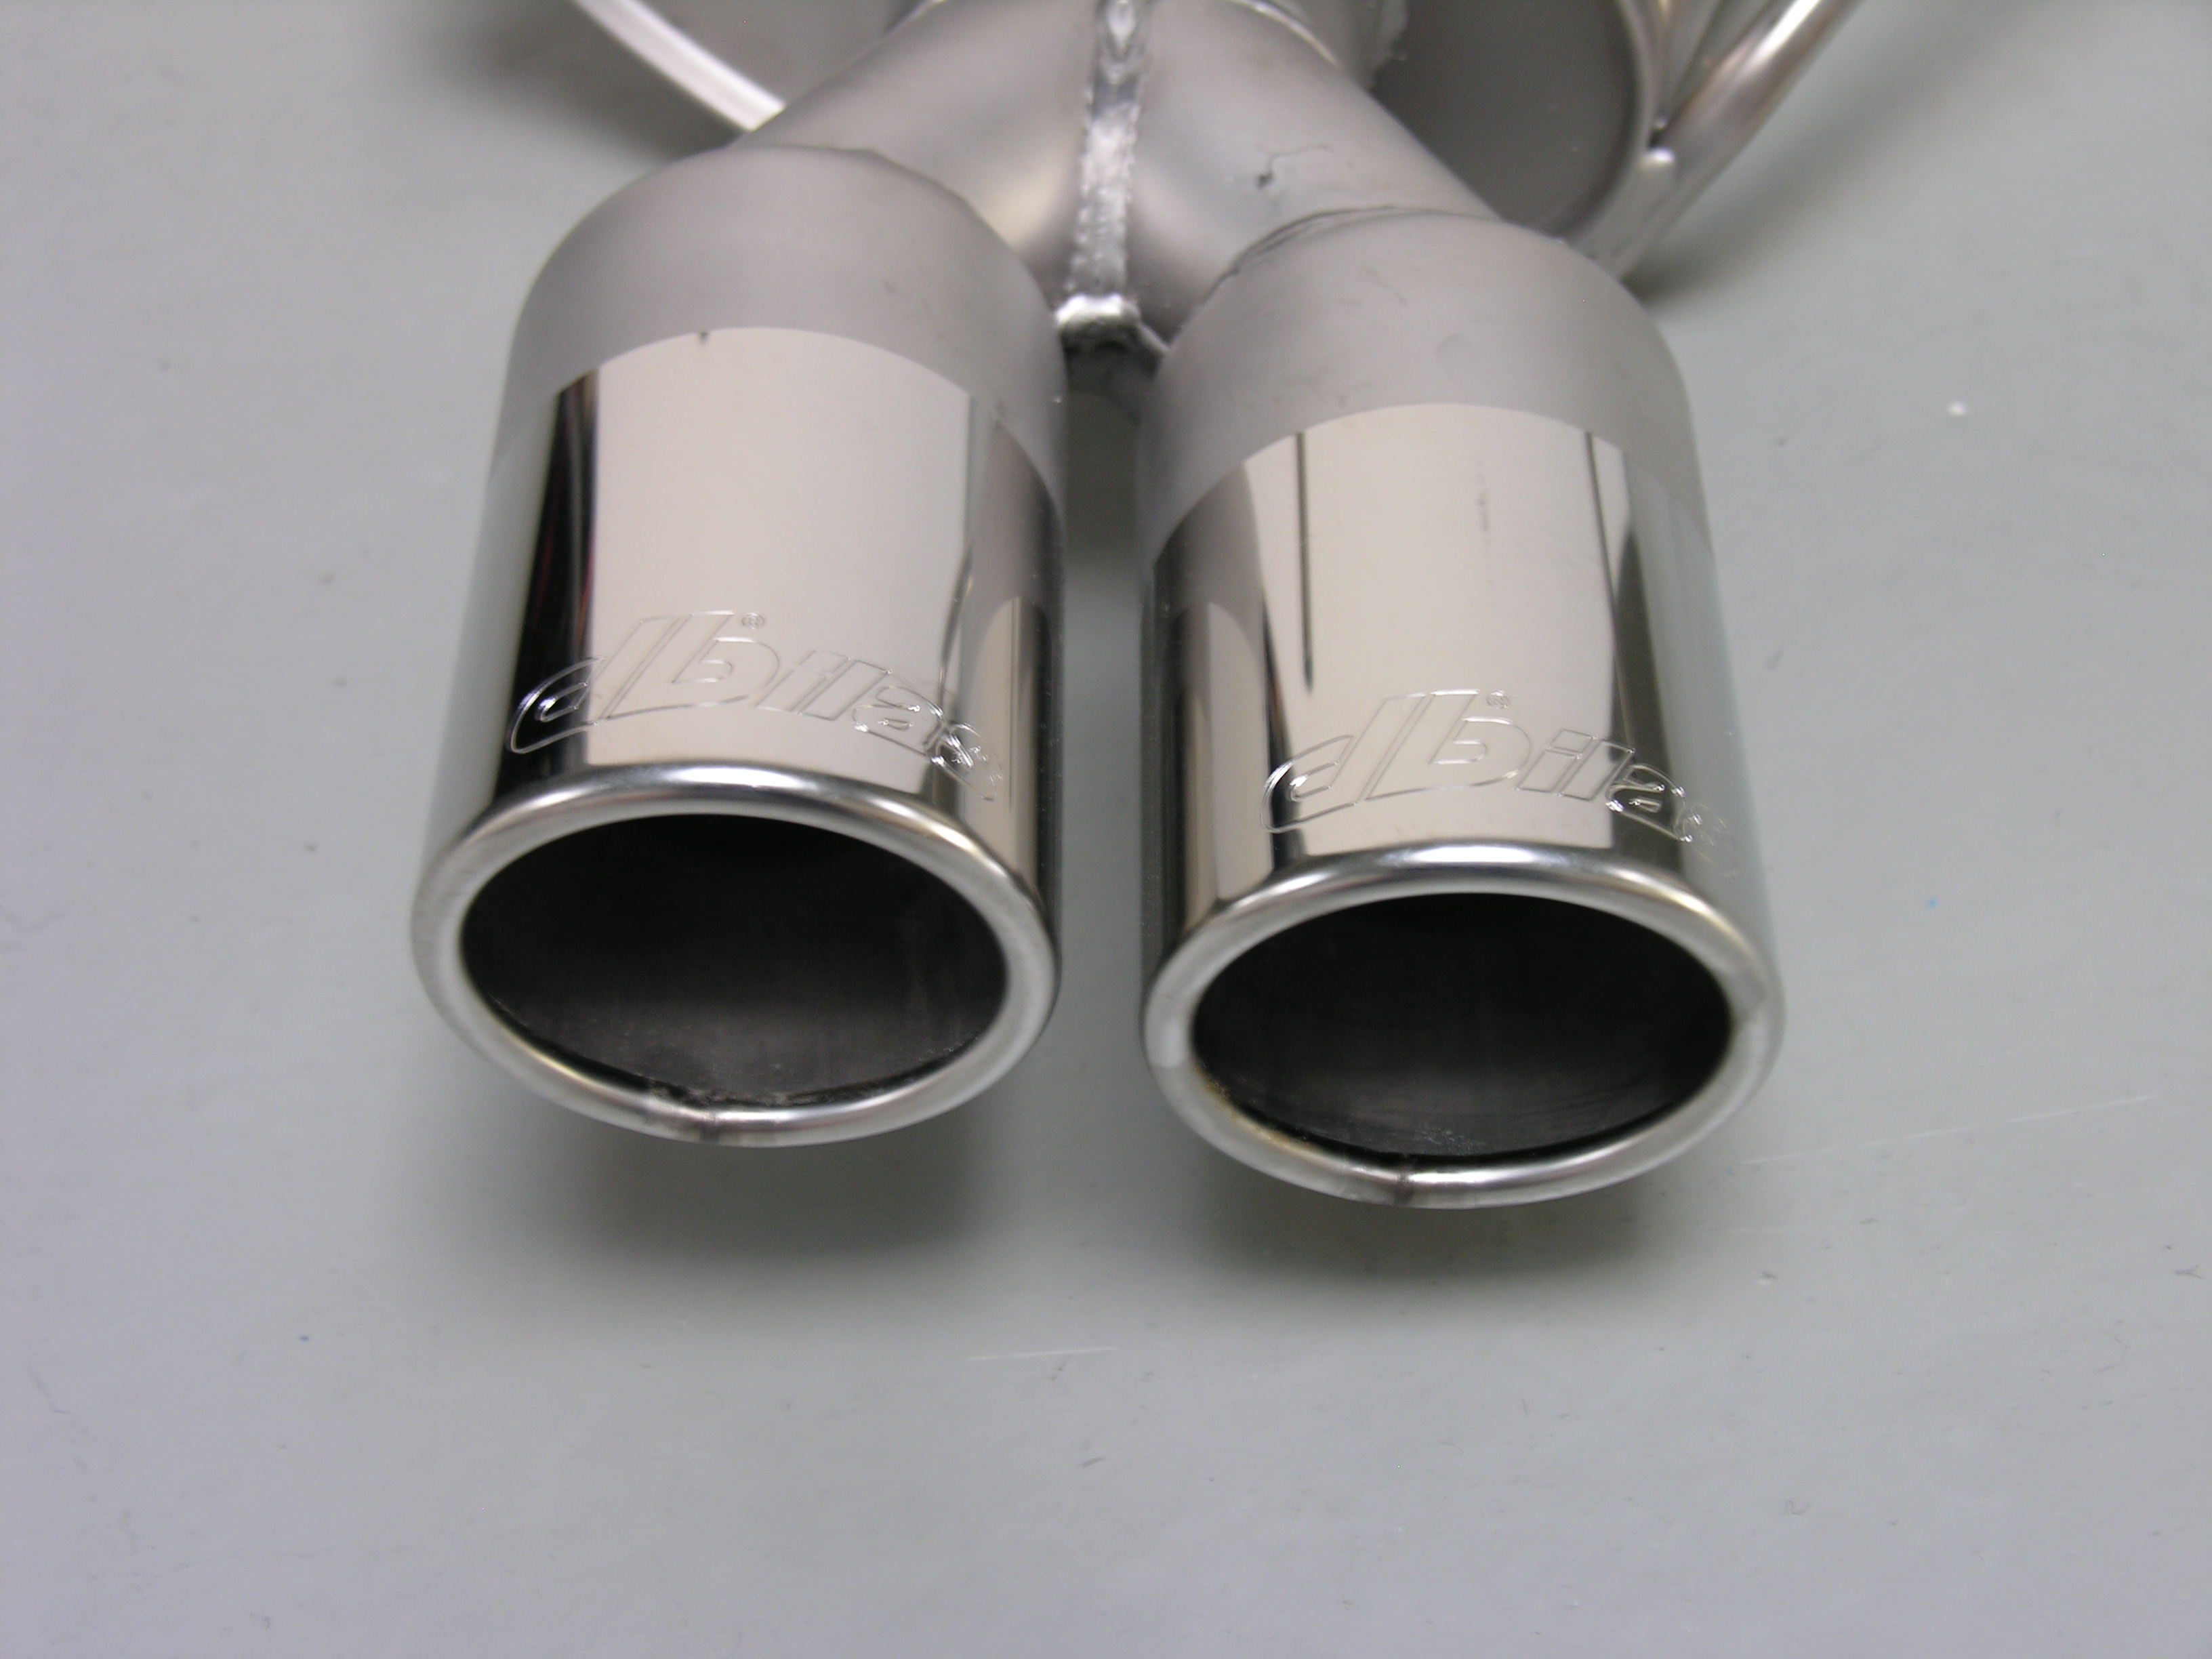 Stainless Steel - Exhaust systems for Opel / Vauxhall  Vectra B fro al  4 Cyl. engines  Tail pipe design 2x80mm